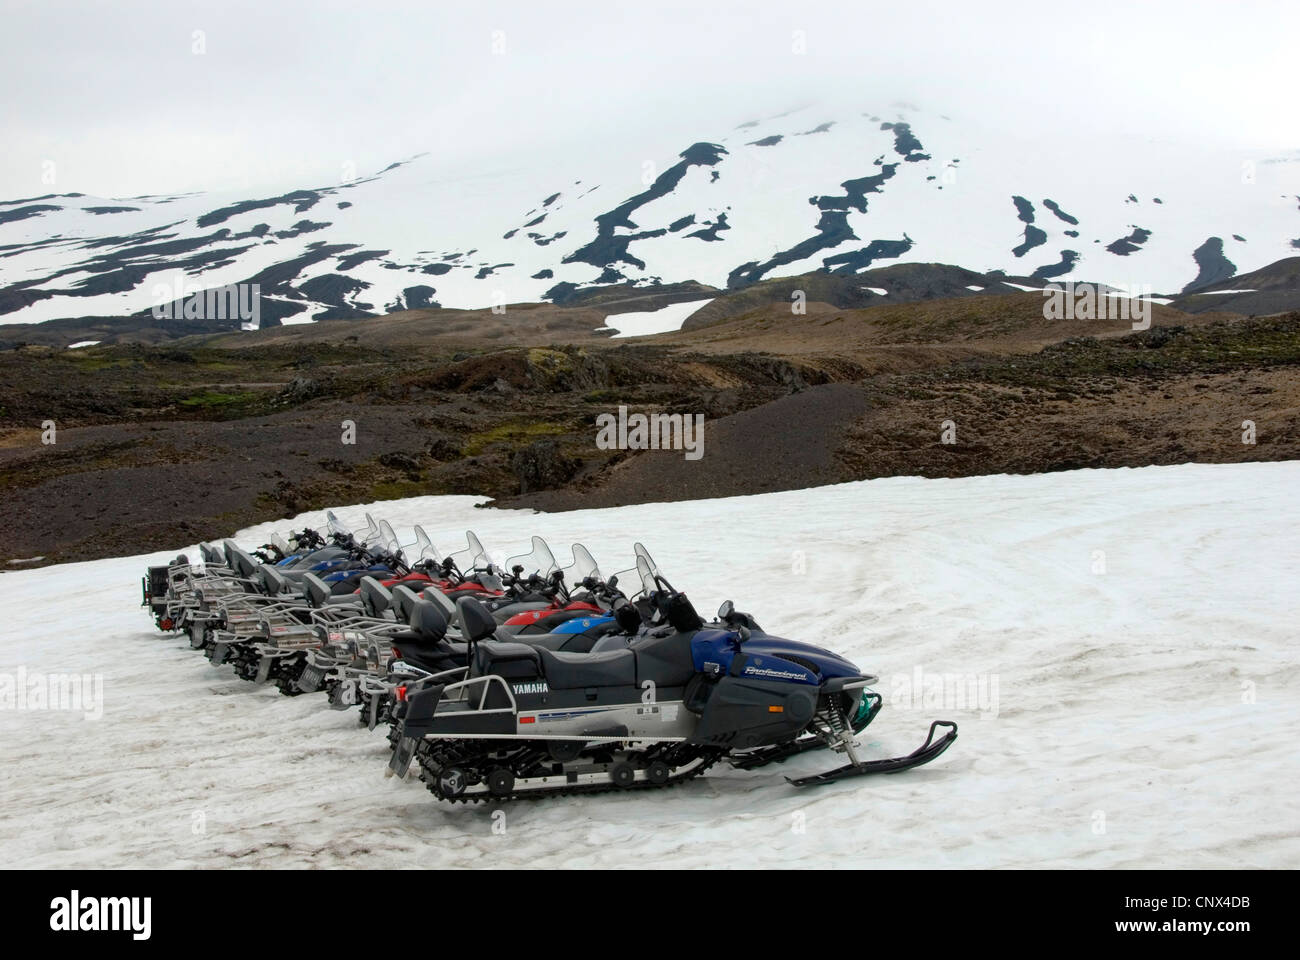 greater number of snow mobiles parked side by side near the glacier 'Snaefellsjoekull', Iceland, Snaefellsness Stock Photo